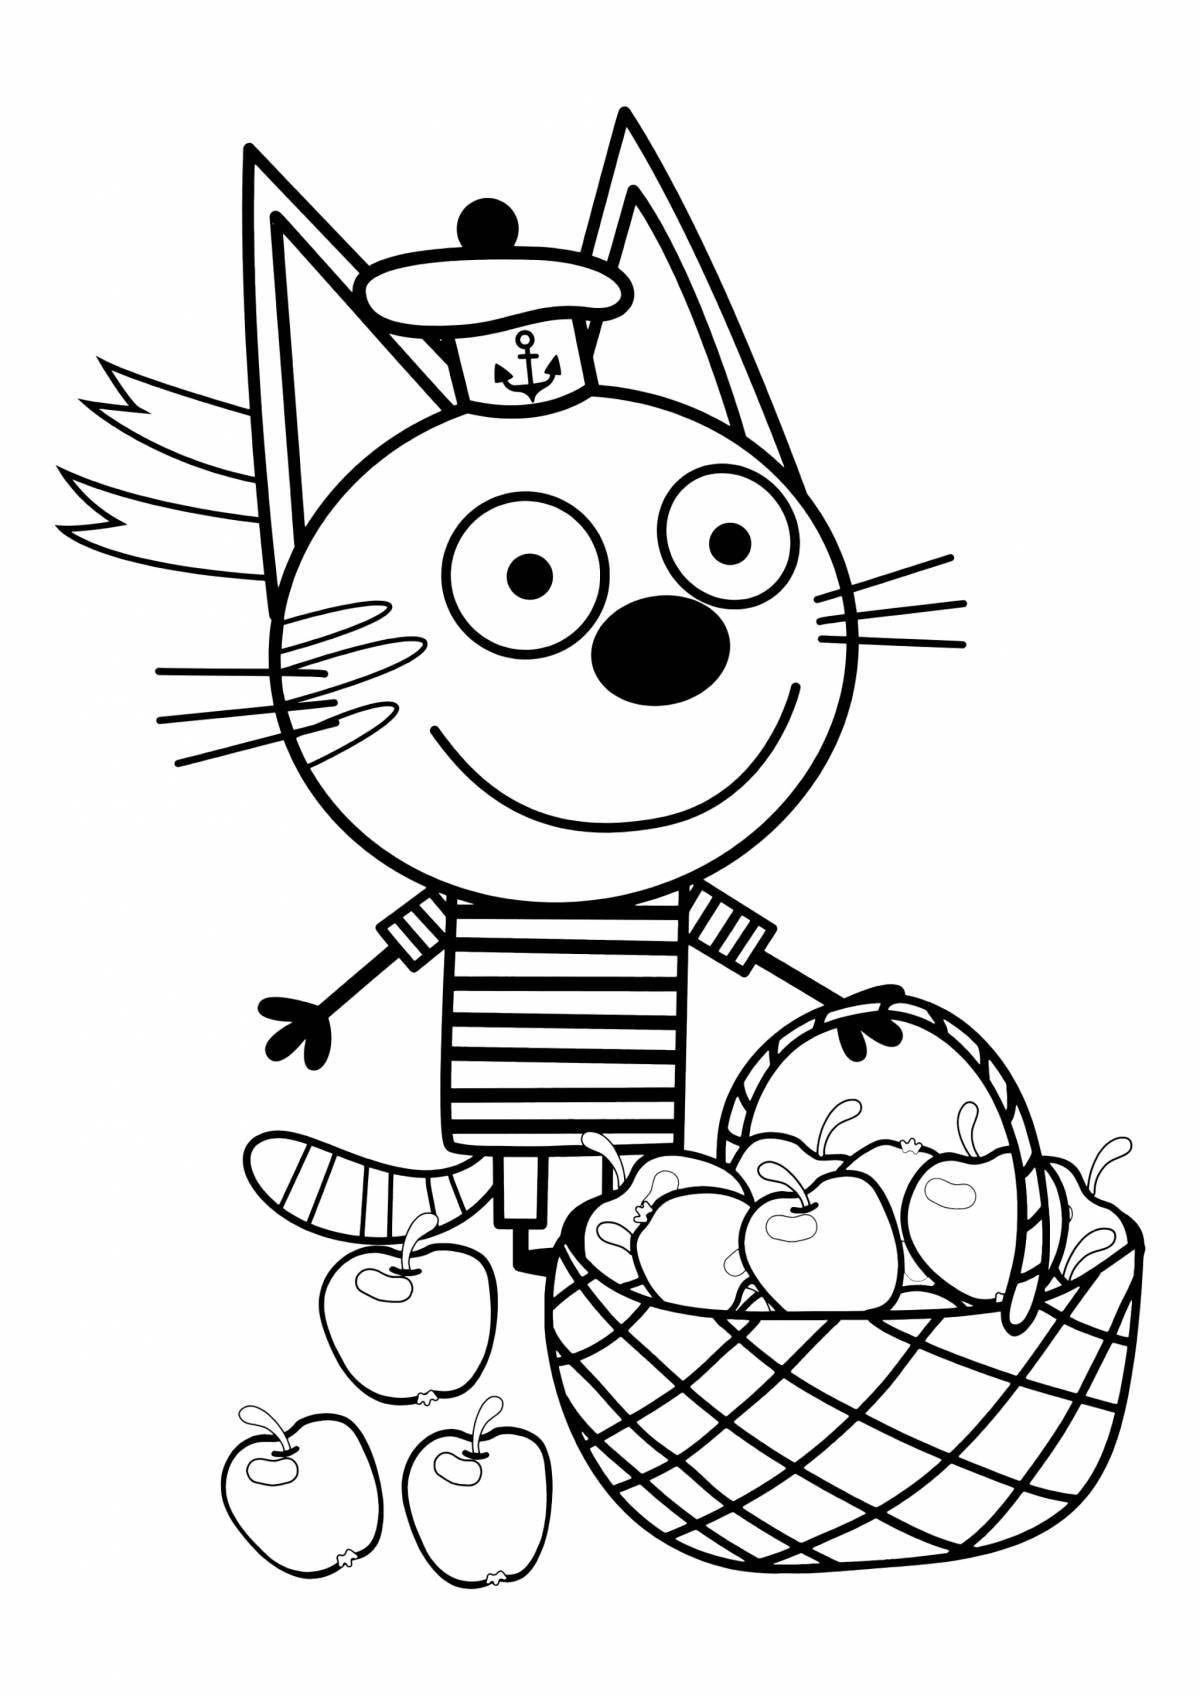 Great three cats coloring book